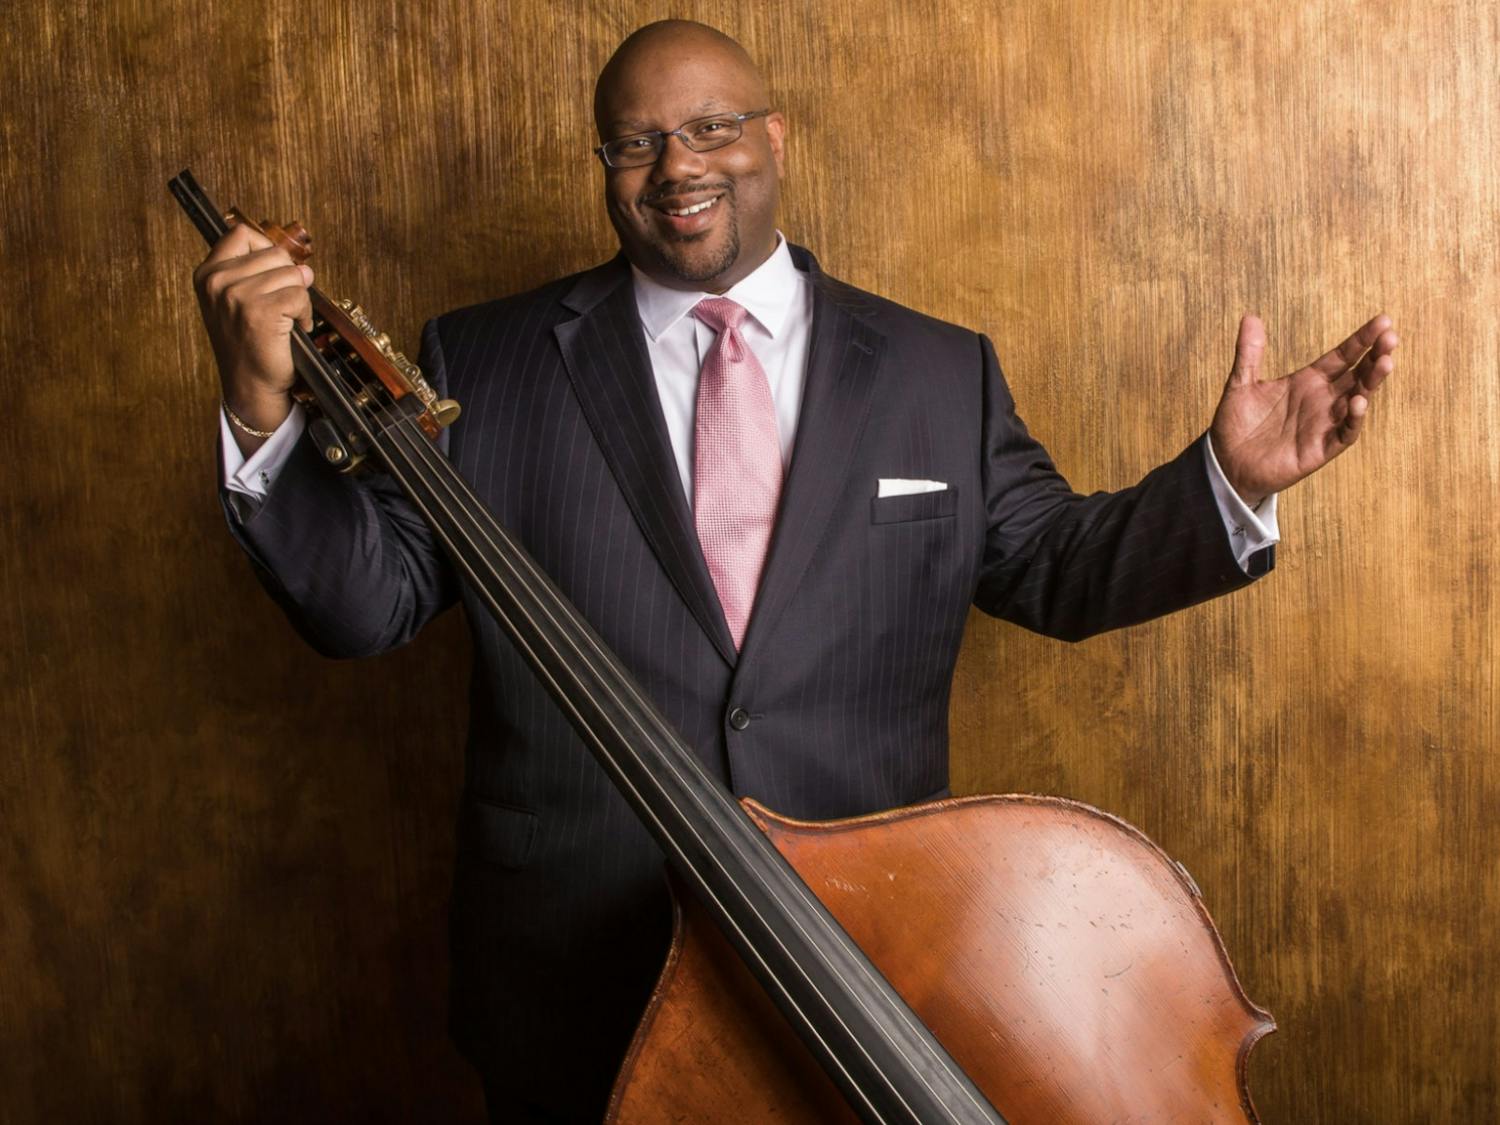 The incoming vice provost for the arts, John Brown, is a bassist, composer and producer from Fayetteville, NC.